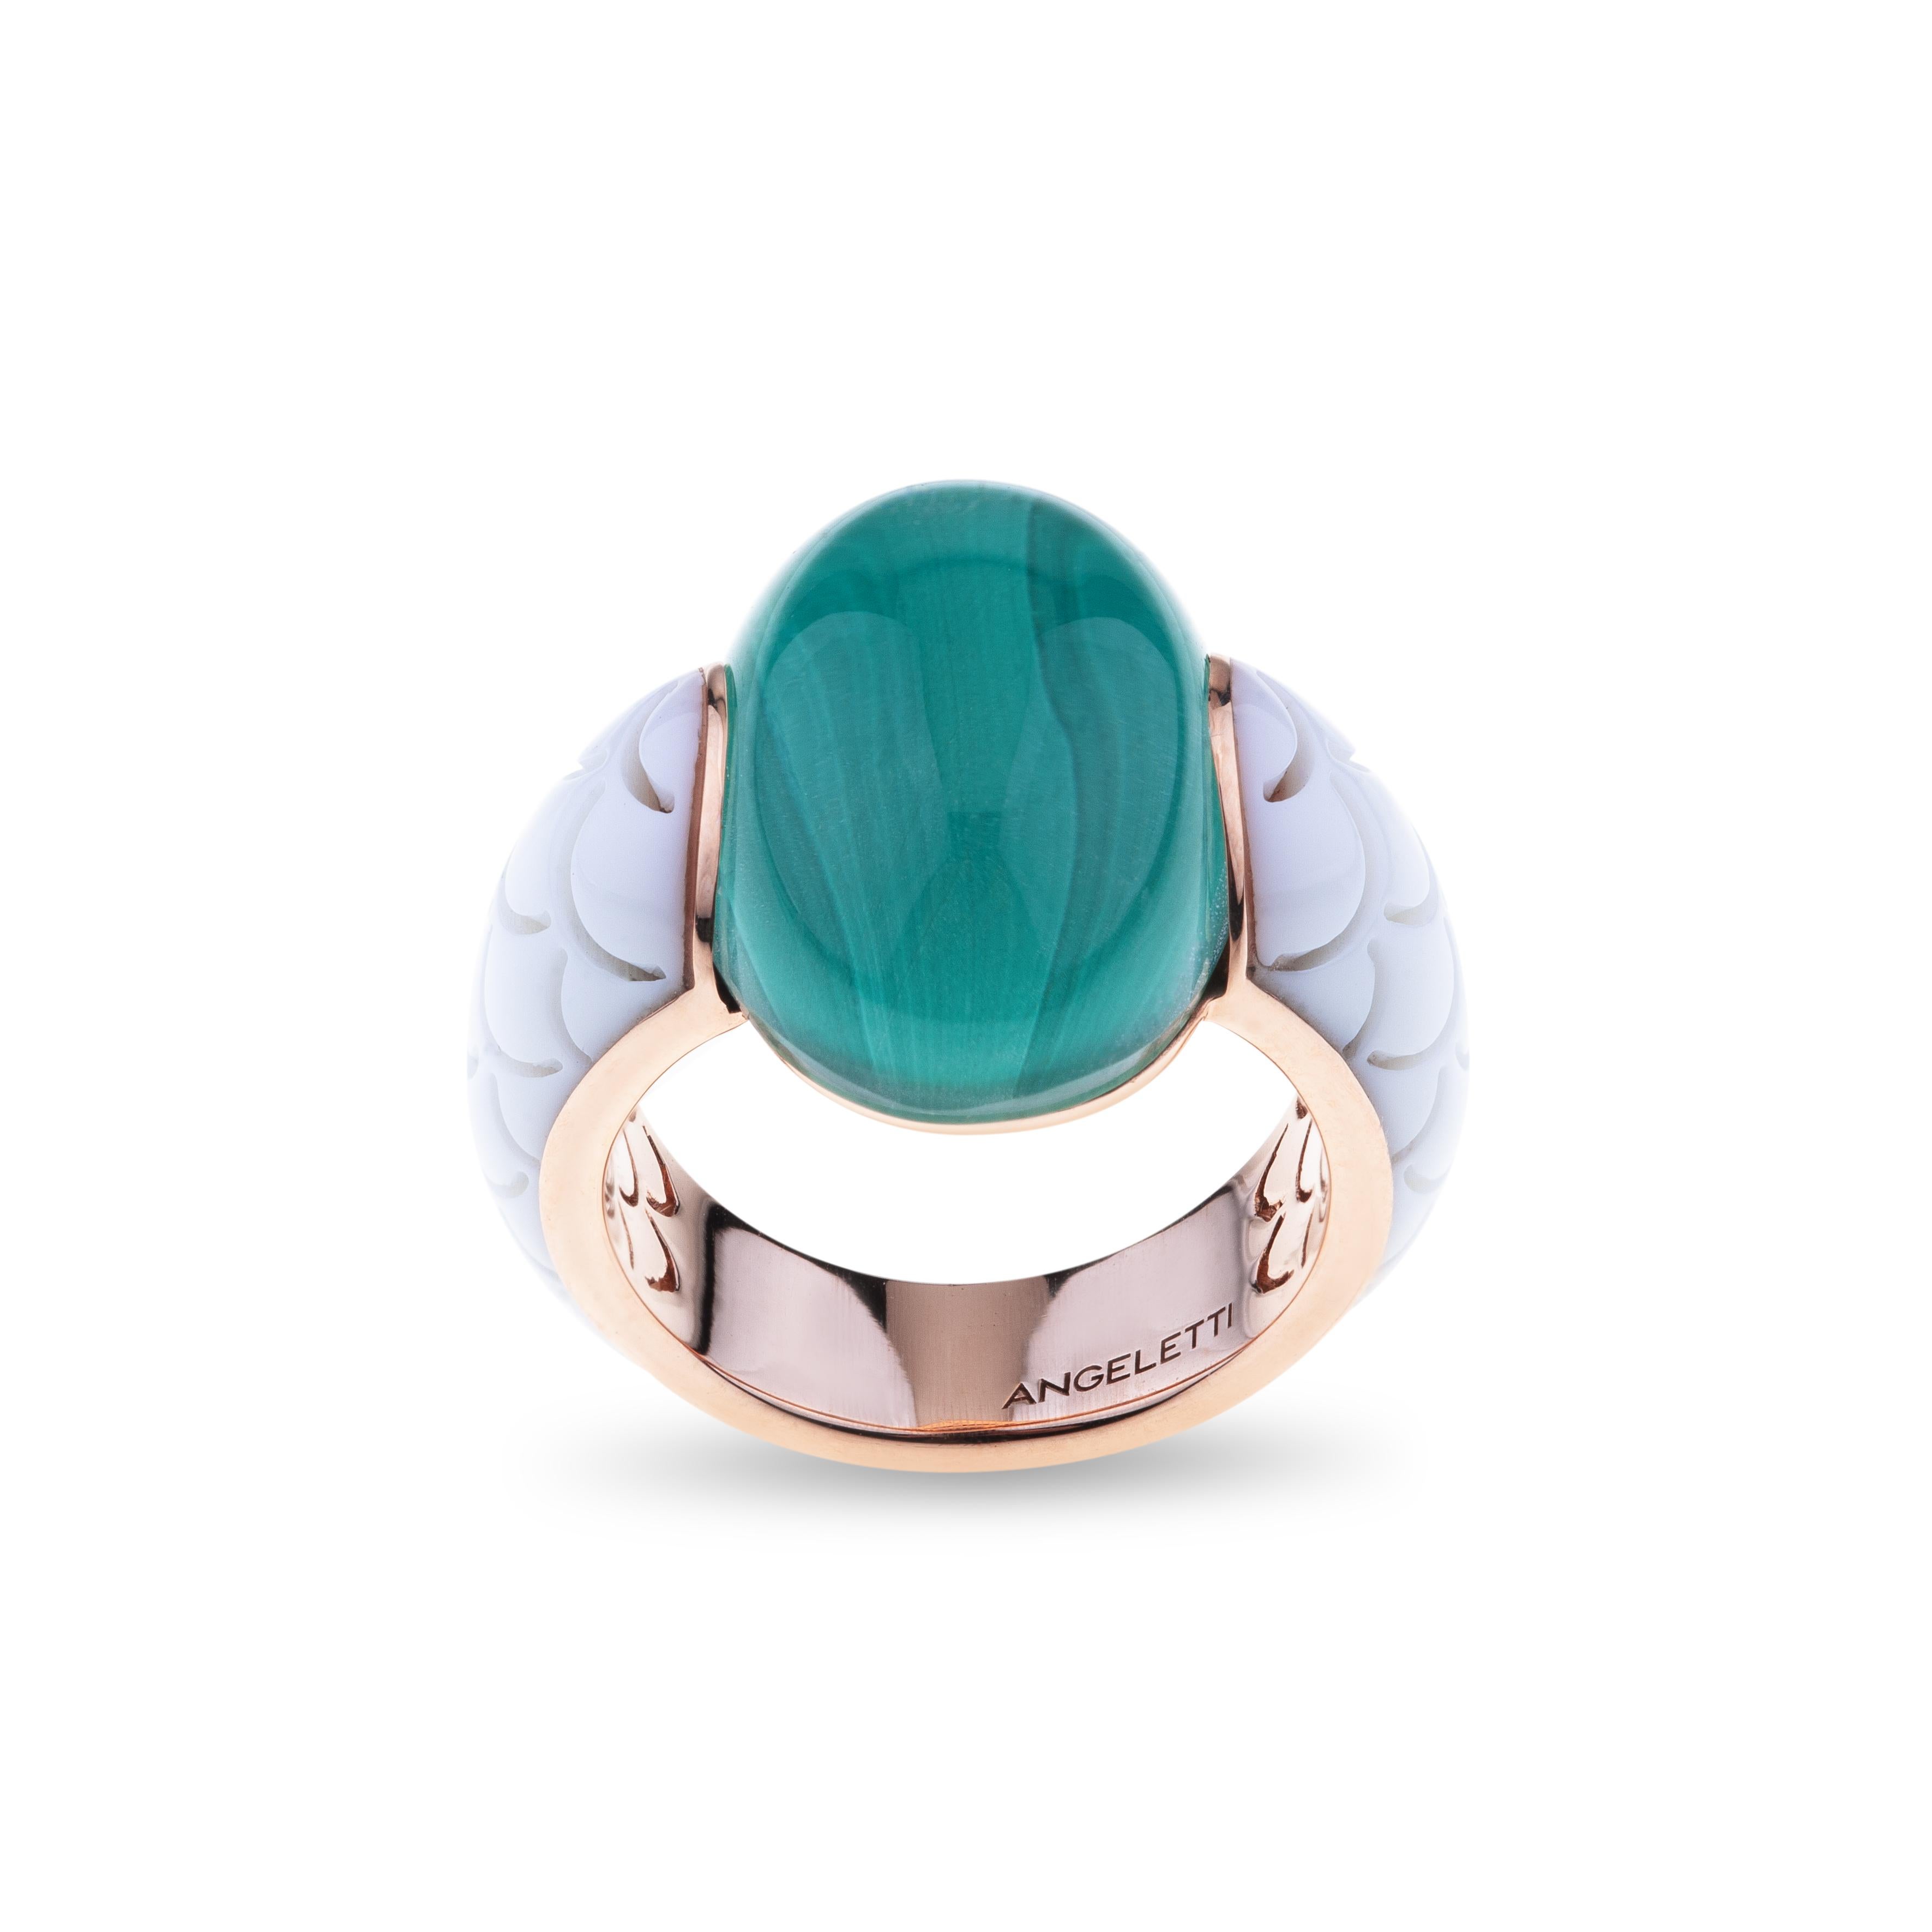 Embrace Collection by Angeletti. Ceramique and Rose Gold Ring With Cabochon Malachite.
Malachite topped with Crystal Rock is the Brilliant Green in the center.
On the side, White Ceramique with Wave design. Gold Weight is Around 7.3 gr.
Iconic